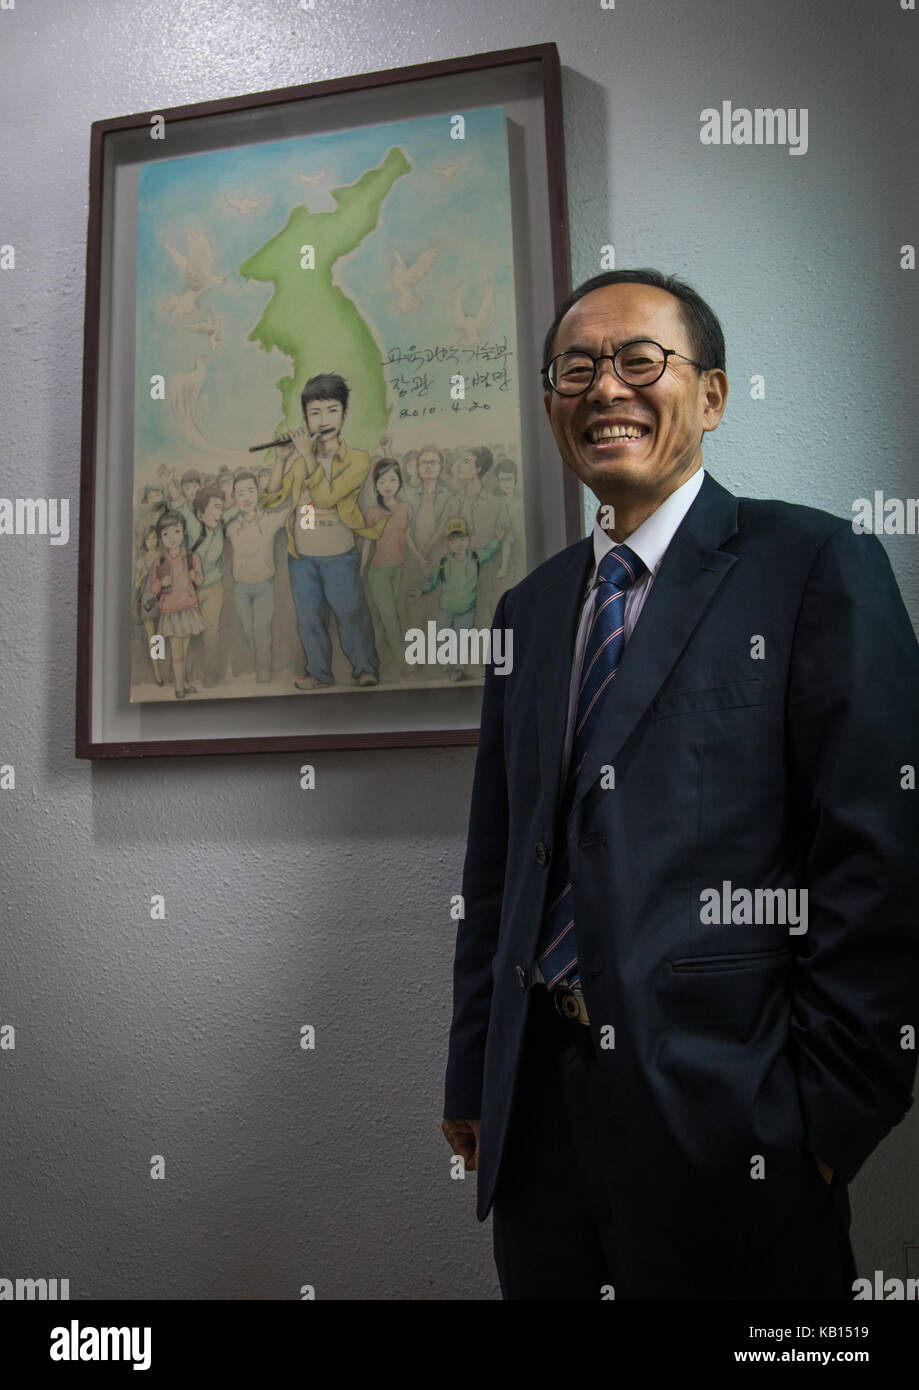 Portrait of a mister hung hoon lee who is the principal of yeomyung school, National Capital Area, Seoul, South Korea Stock Photo